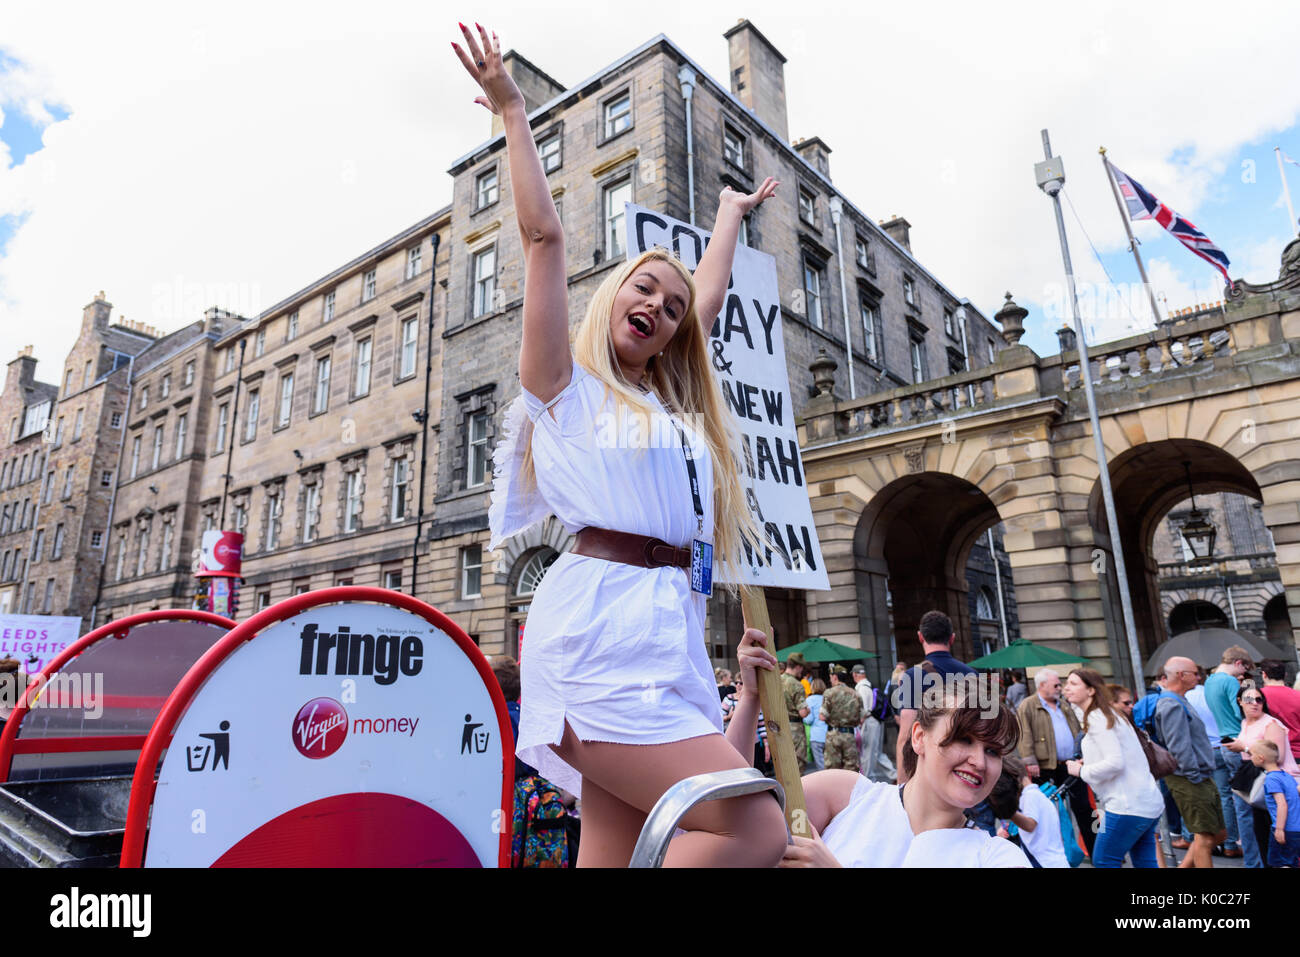 EDINBURGH, UNITED KINGDOM - AUGUST 15, 2017 - A girl advertises a theatrical performance along the Royal Mile of Edinburgh during the 70th anniversary Stock Photo